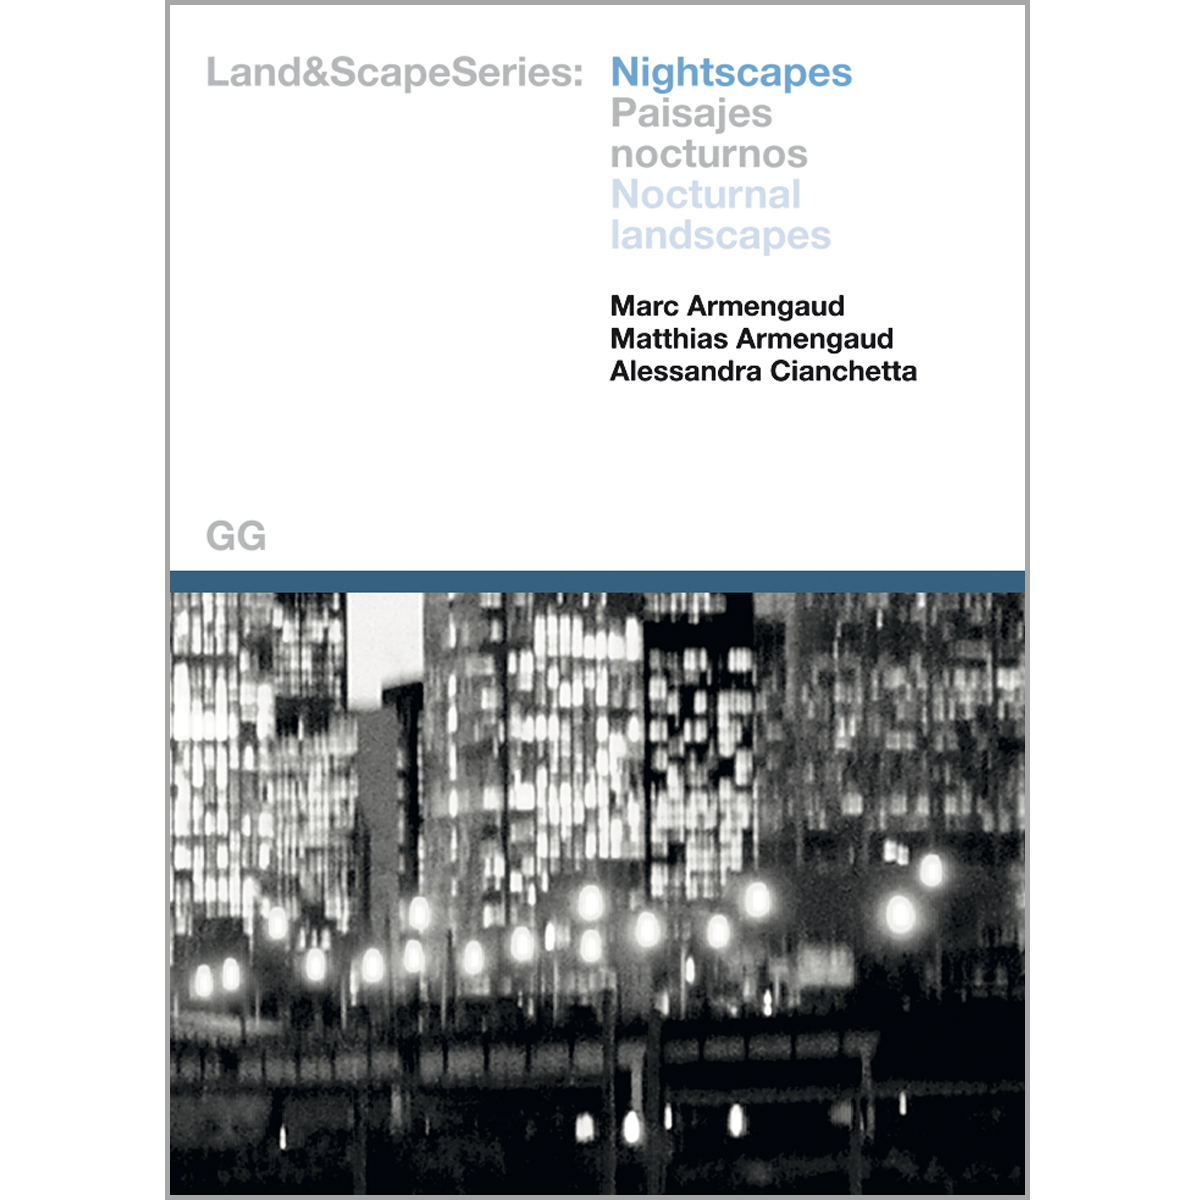 Land&ScapeSeries: Nightscapes